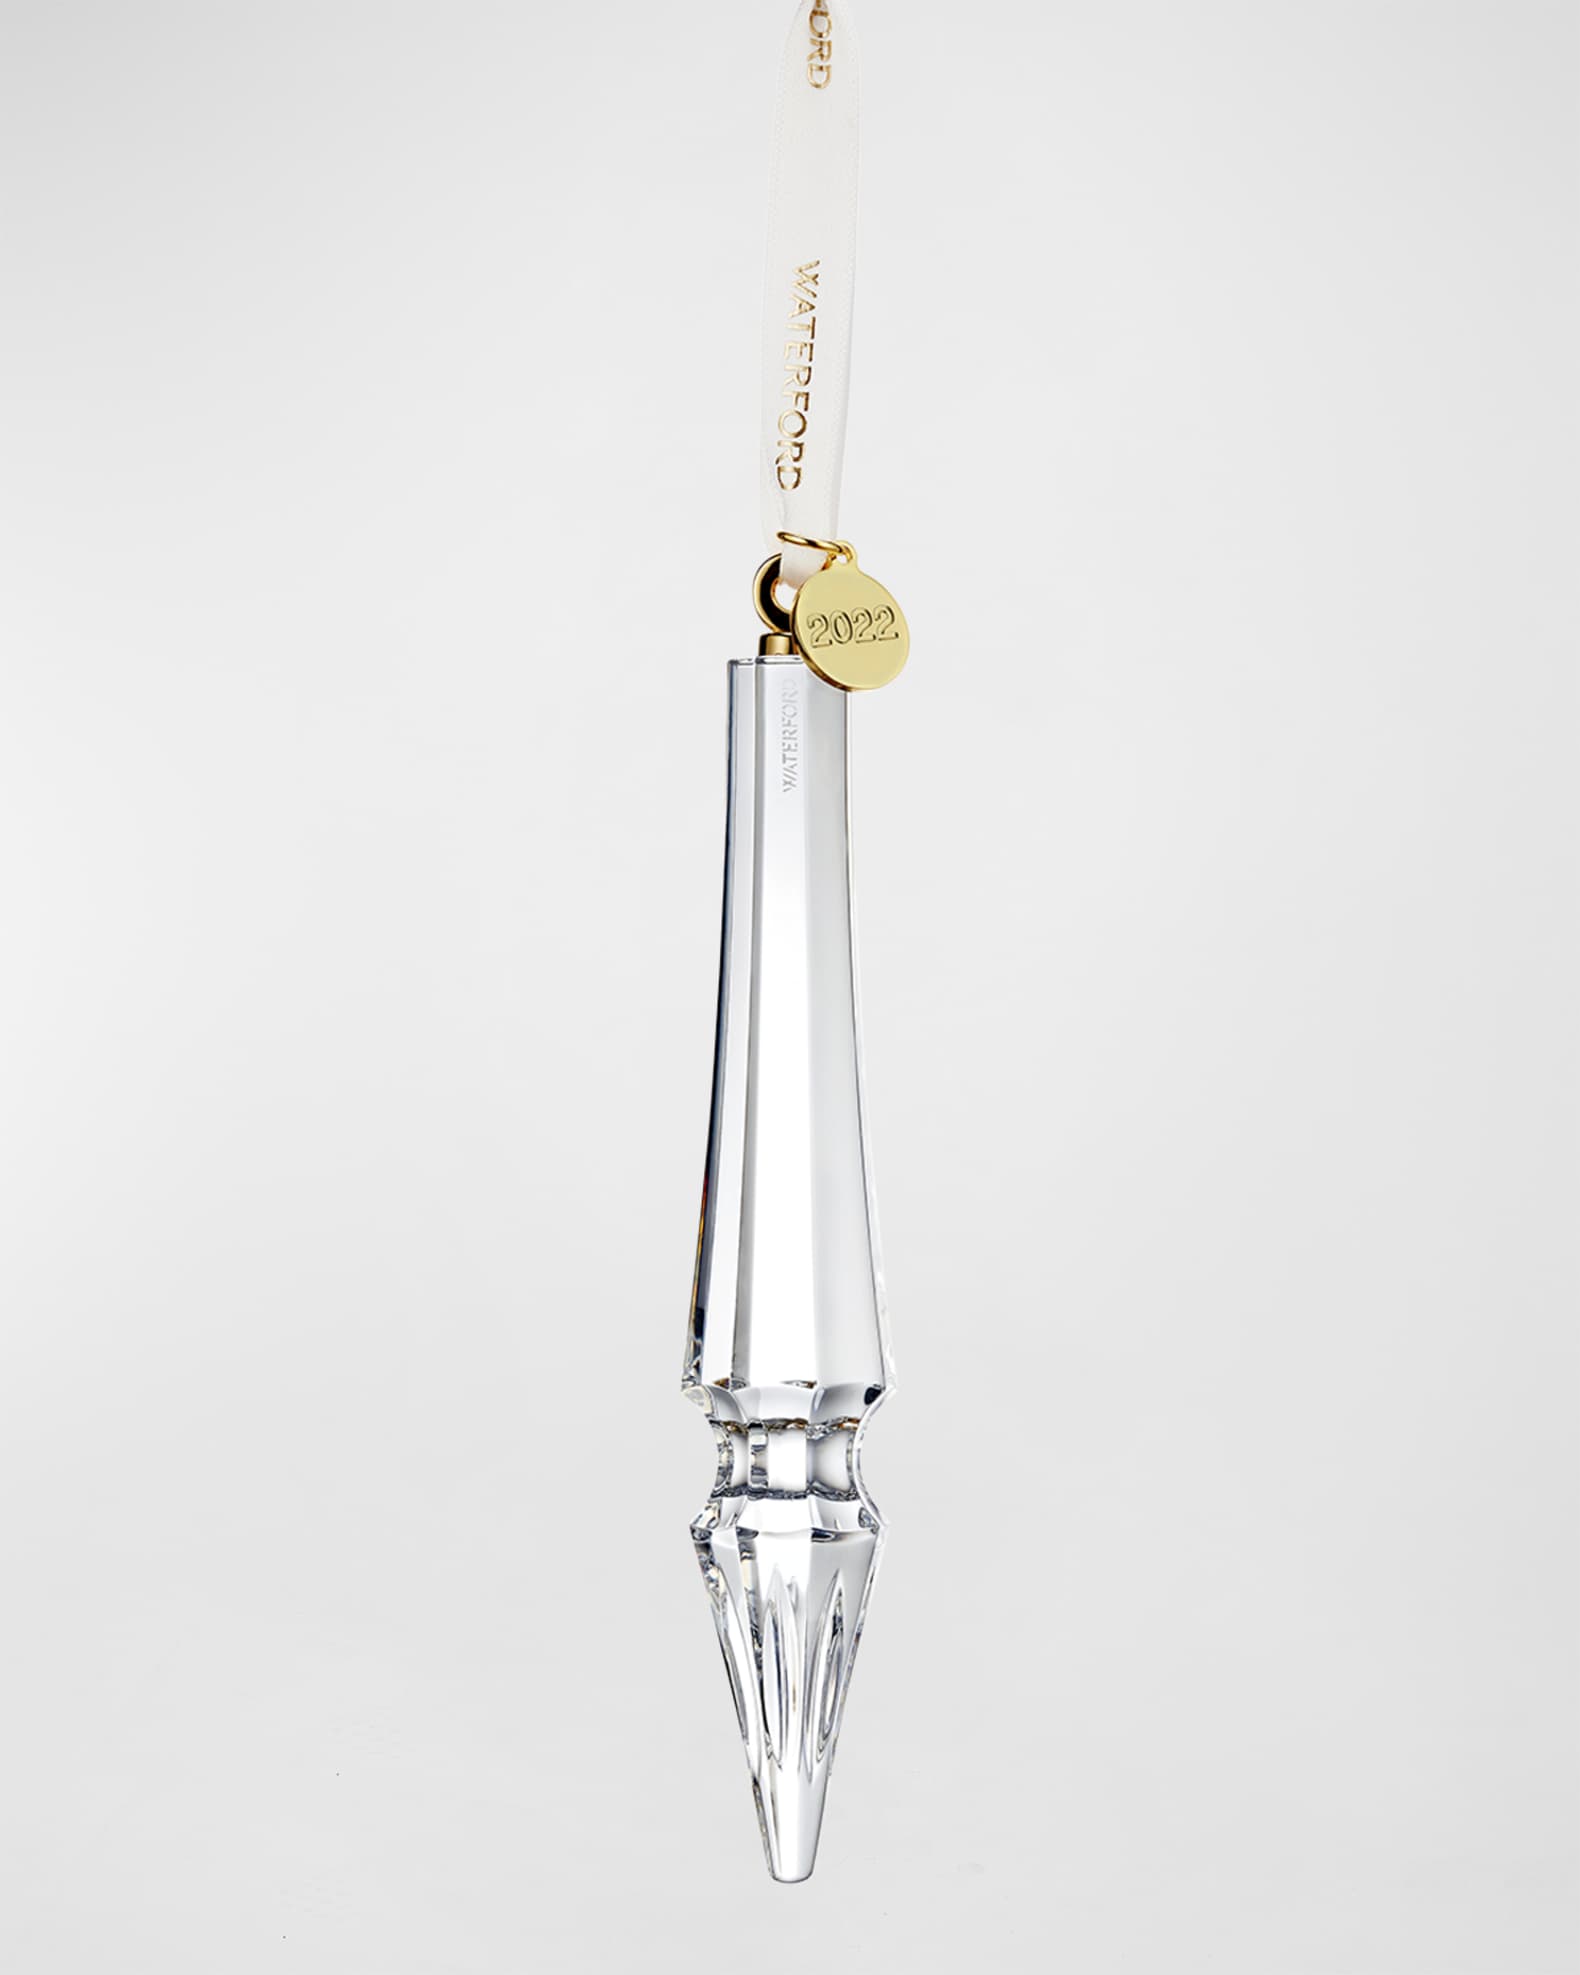 Waterford Crystal Icicle Ornament 2022 | Horchow